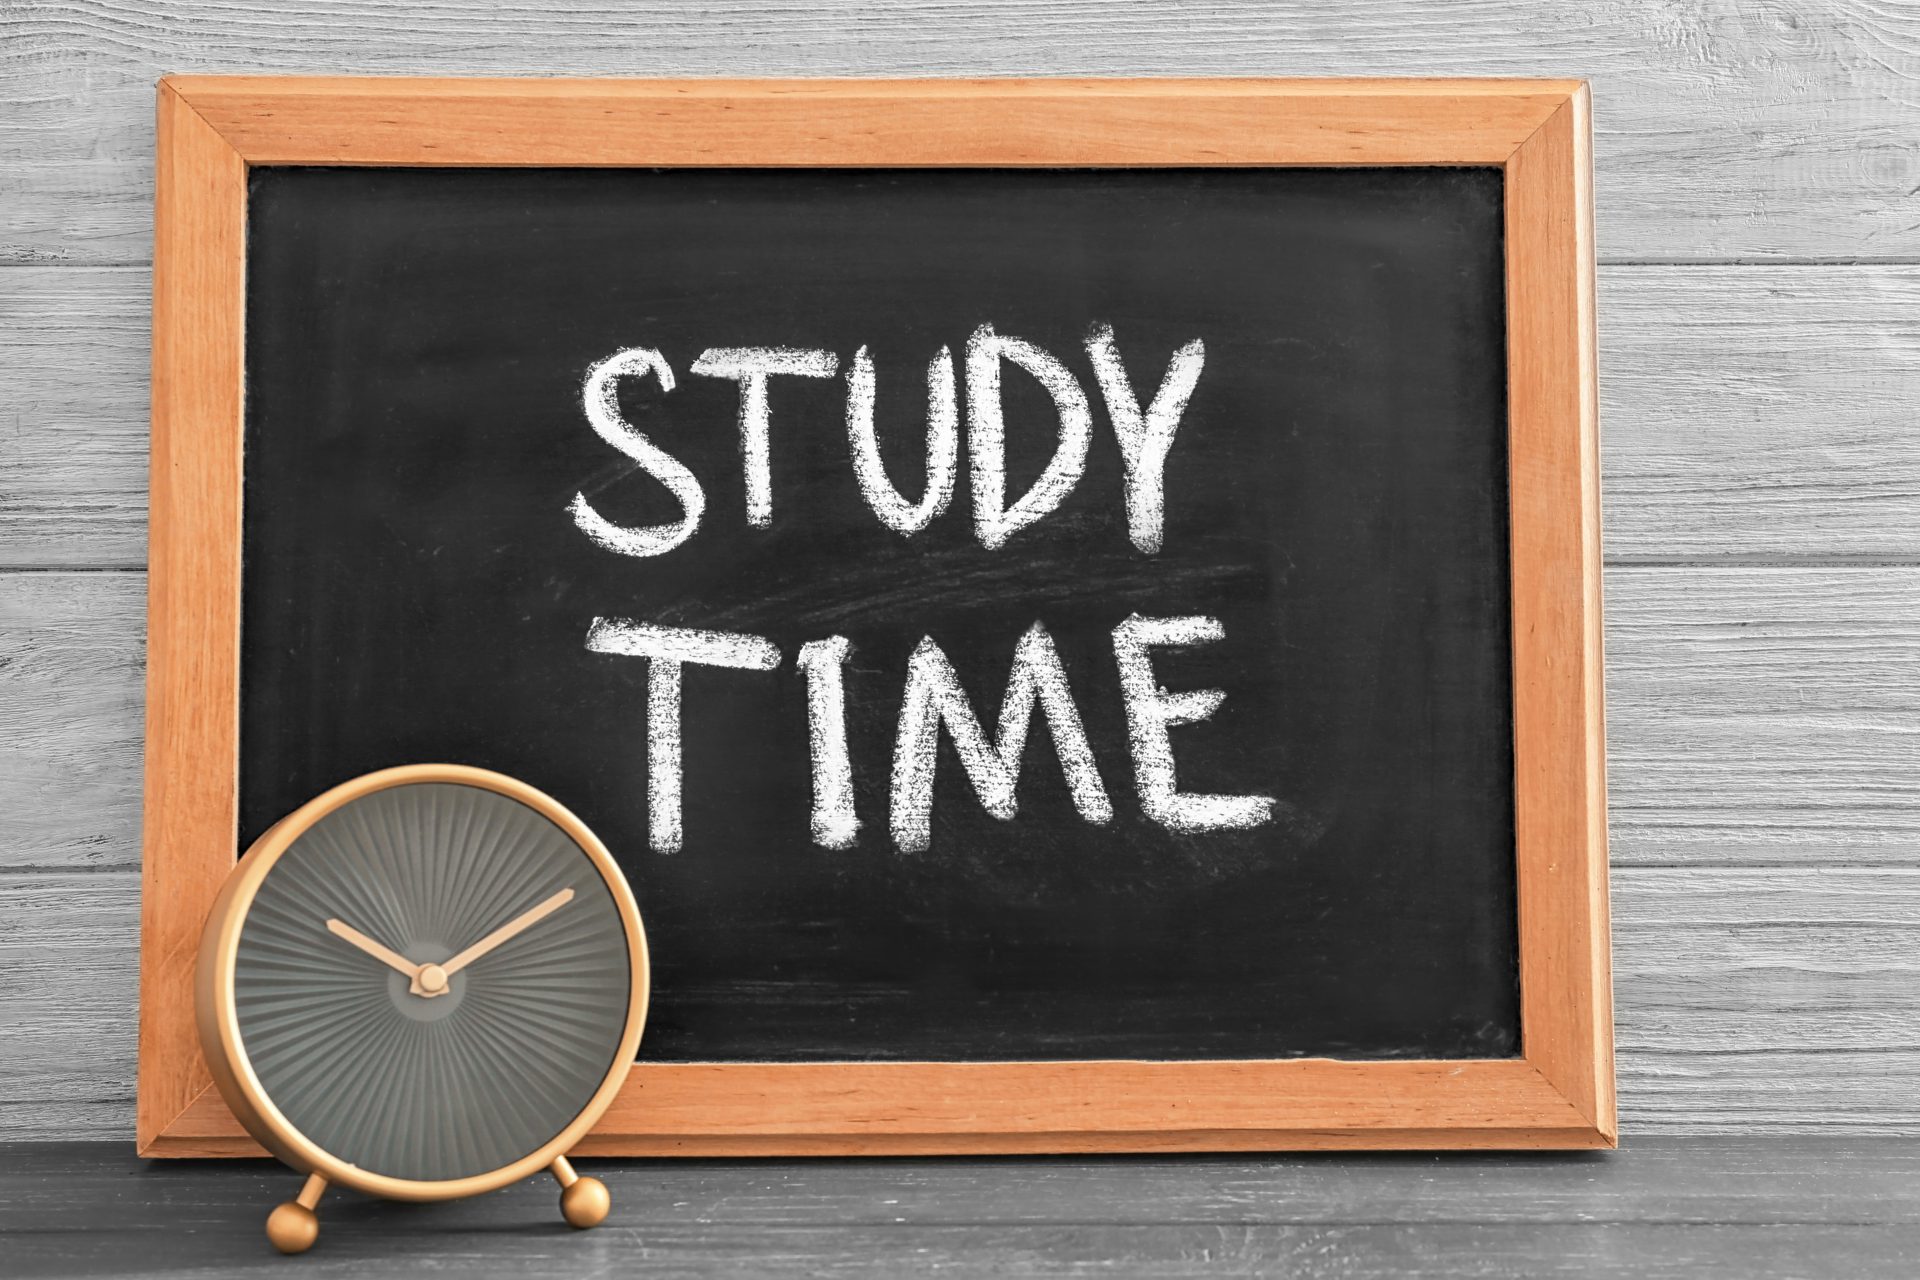 Time we best. Study time. Картинка study time. Time for study обои. Картинки its time to study English.